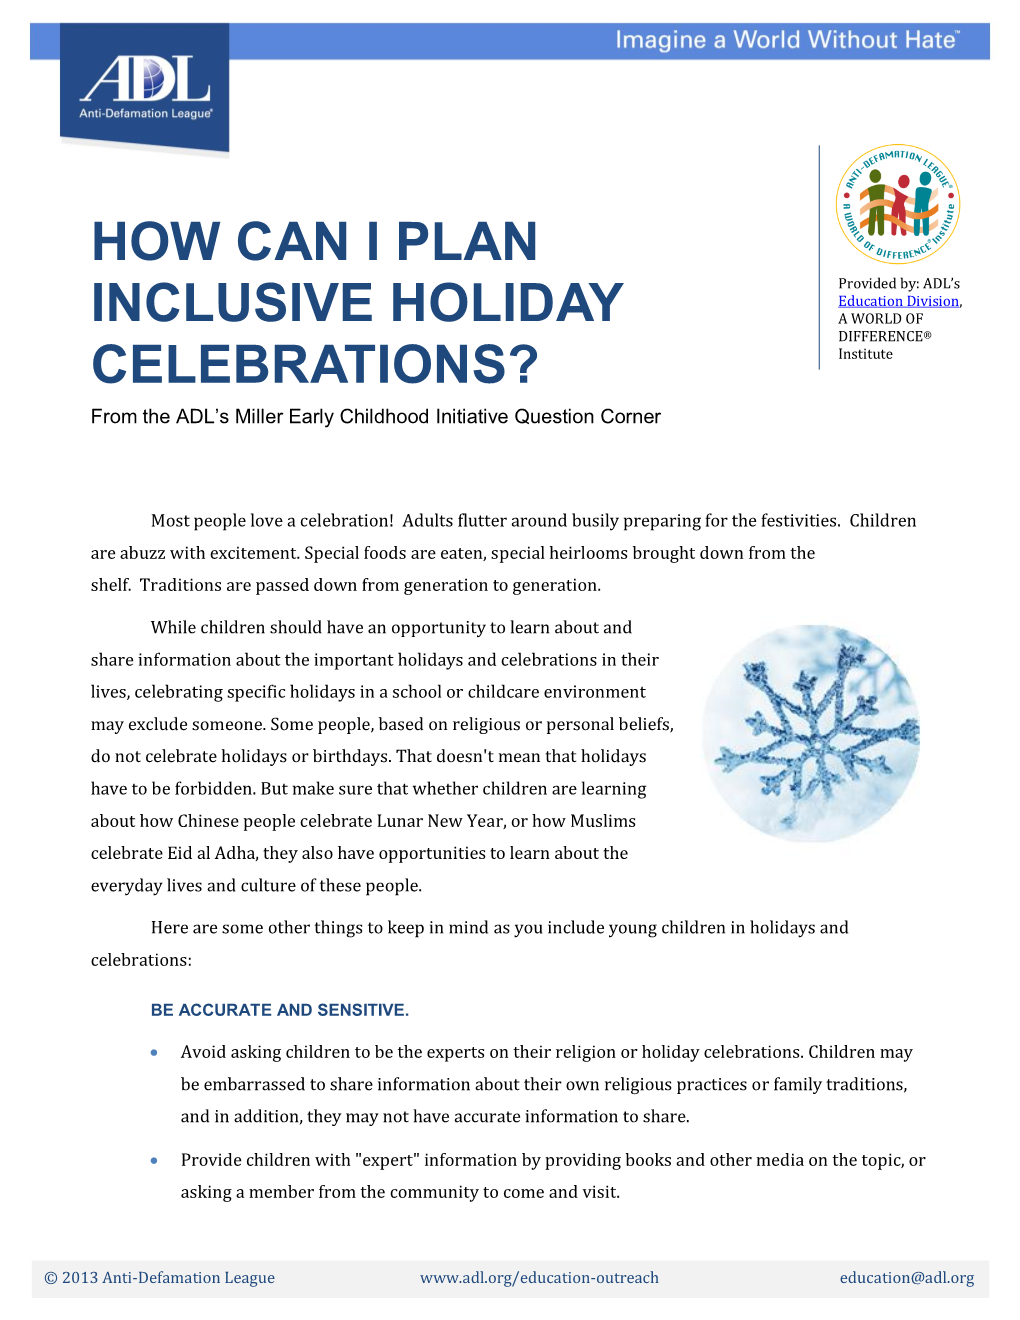 How Can I Plan Inclusive Holiday Celebrations?